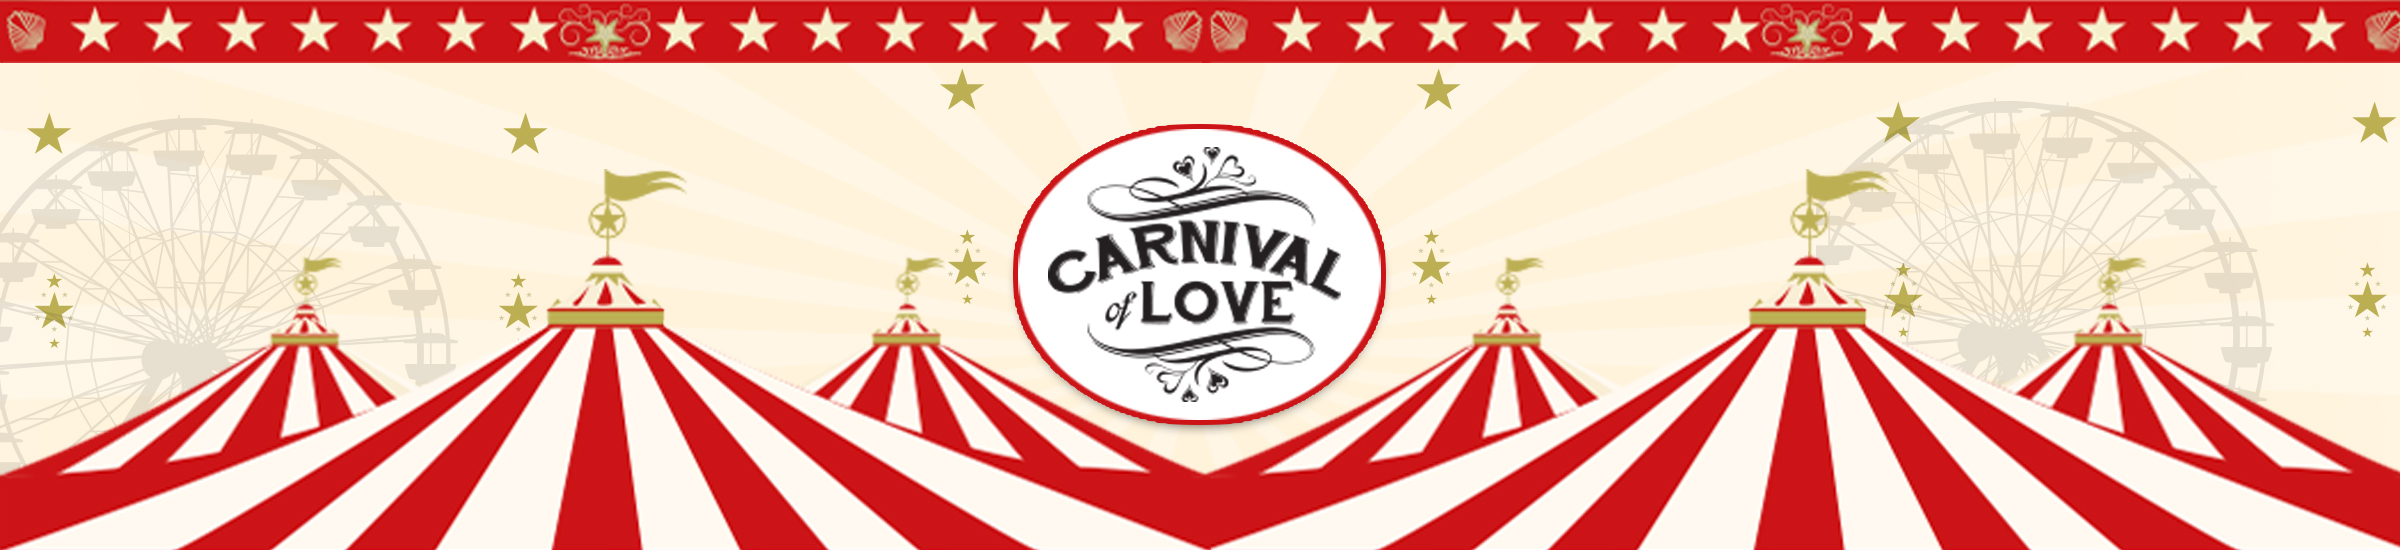 2023 Carnival of Love Gala graphic with Ferris wheel, tent tops, and golden starts and flags